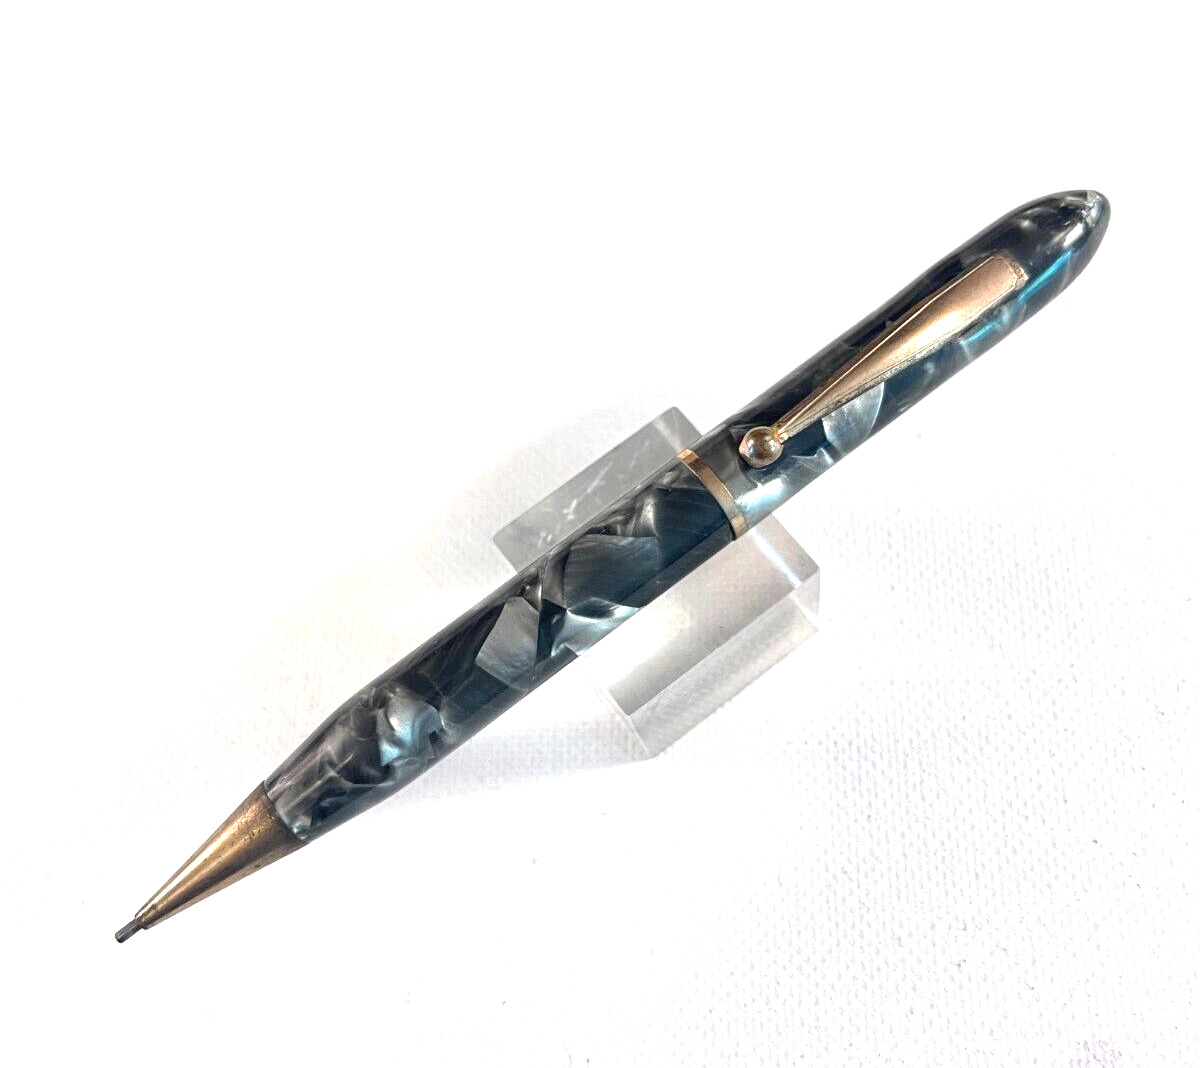 Gorgeous 1950s Mechanical twist pencil. Mottled shades of silver/grey. Gold trim